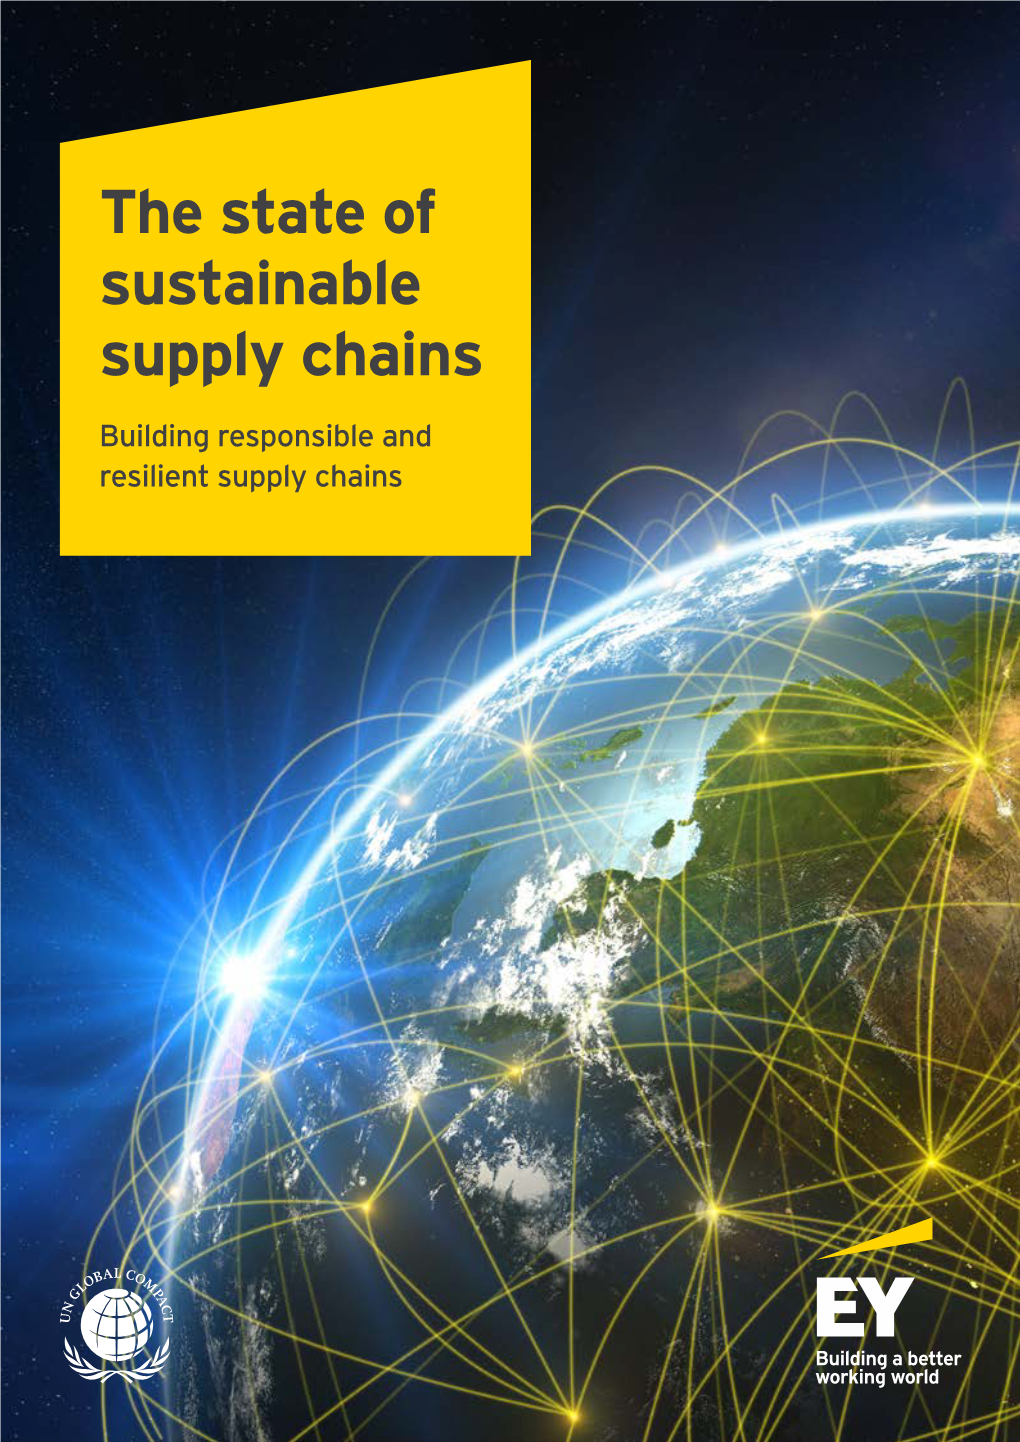 The State of Sustainable Supply Chains